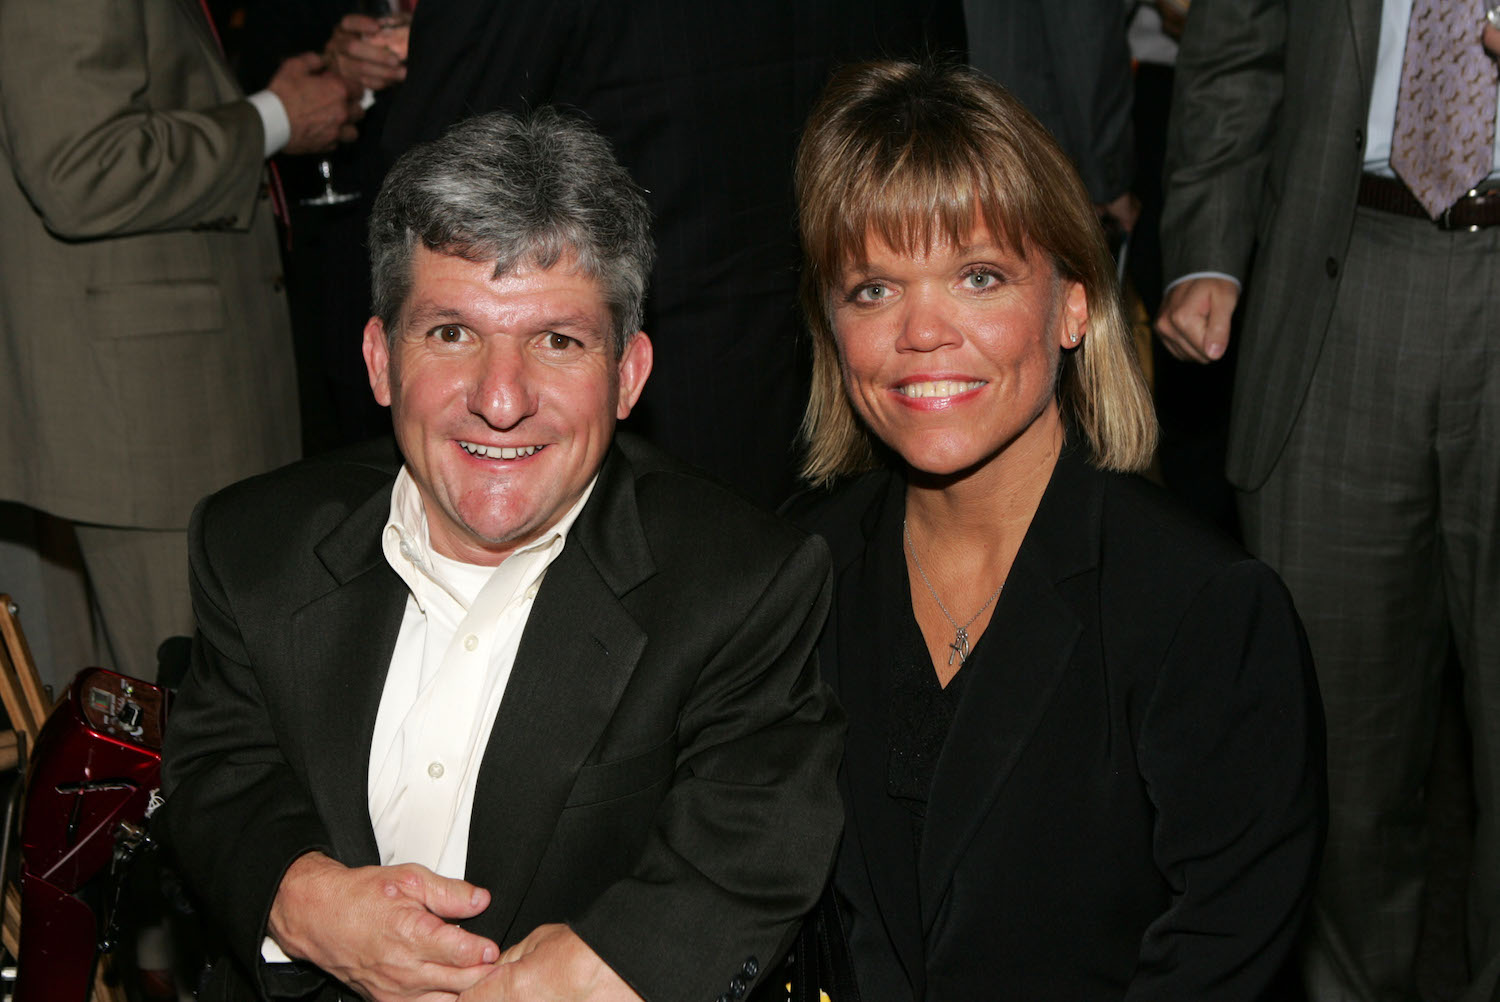 Matt Roloff and Amy Roloff from 'Little People, Big World' sitting side by side and smiling